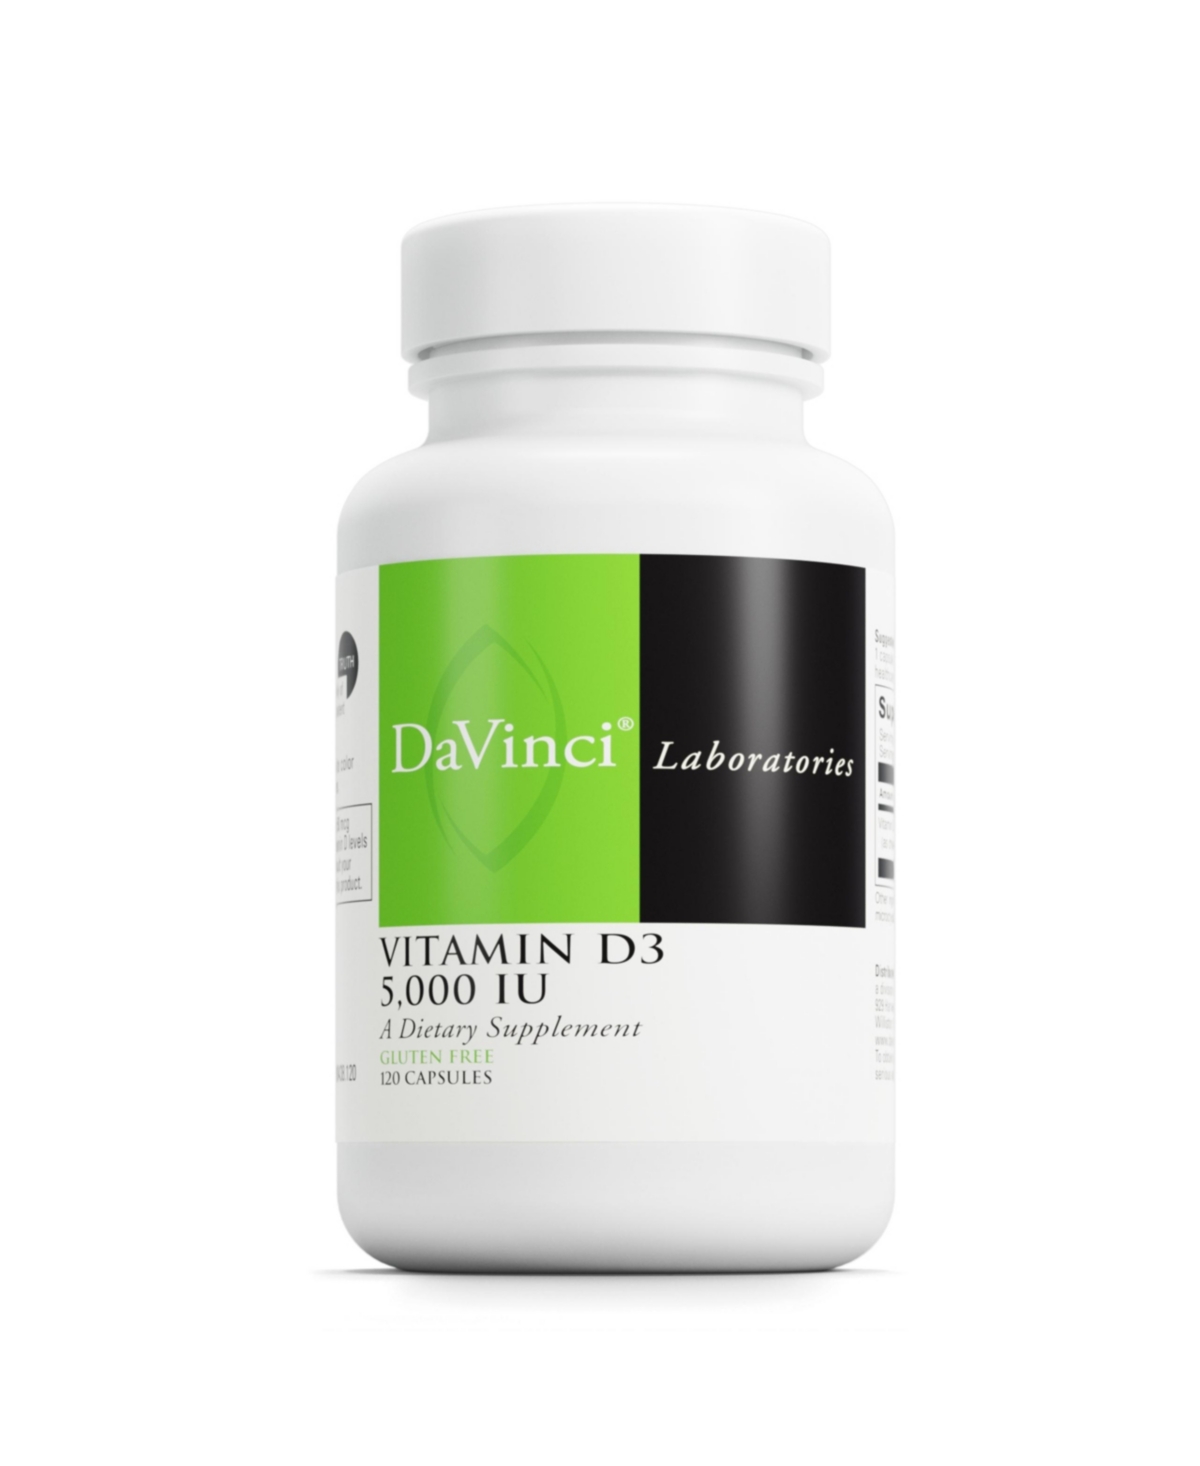 DaVinci Labs Vitamin D3 5000 Iu - Dietary Supplement to Support Healthy Teeth and Bones, Cardiovascular Function, and Immune Heal